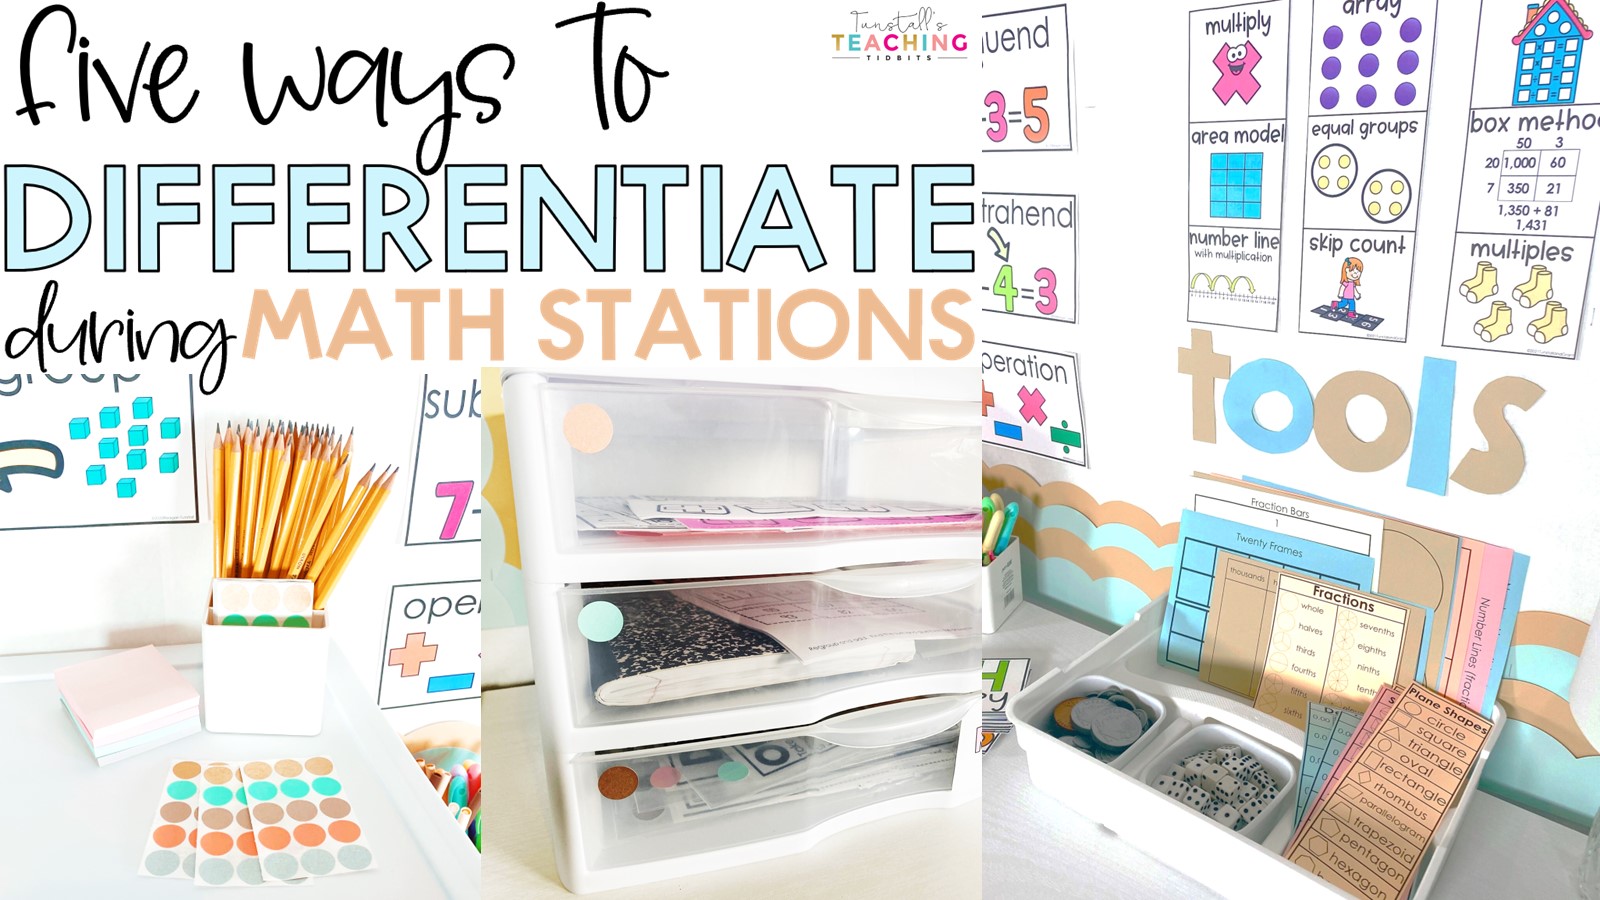 Five Ways to Differentiate During Math Stations